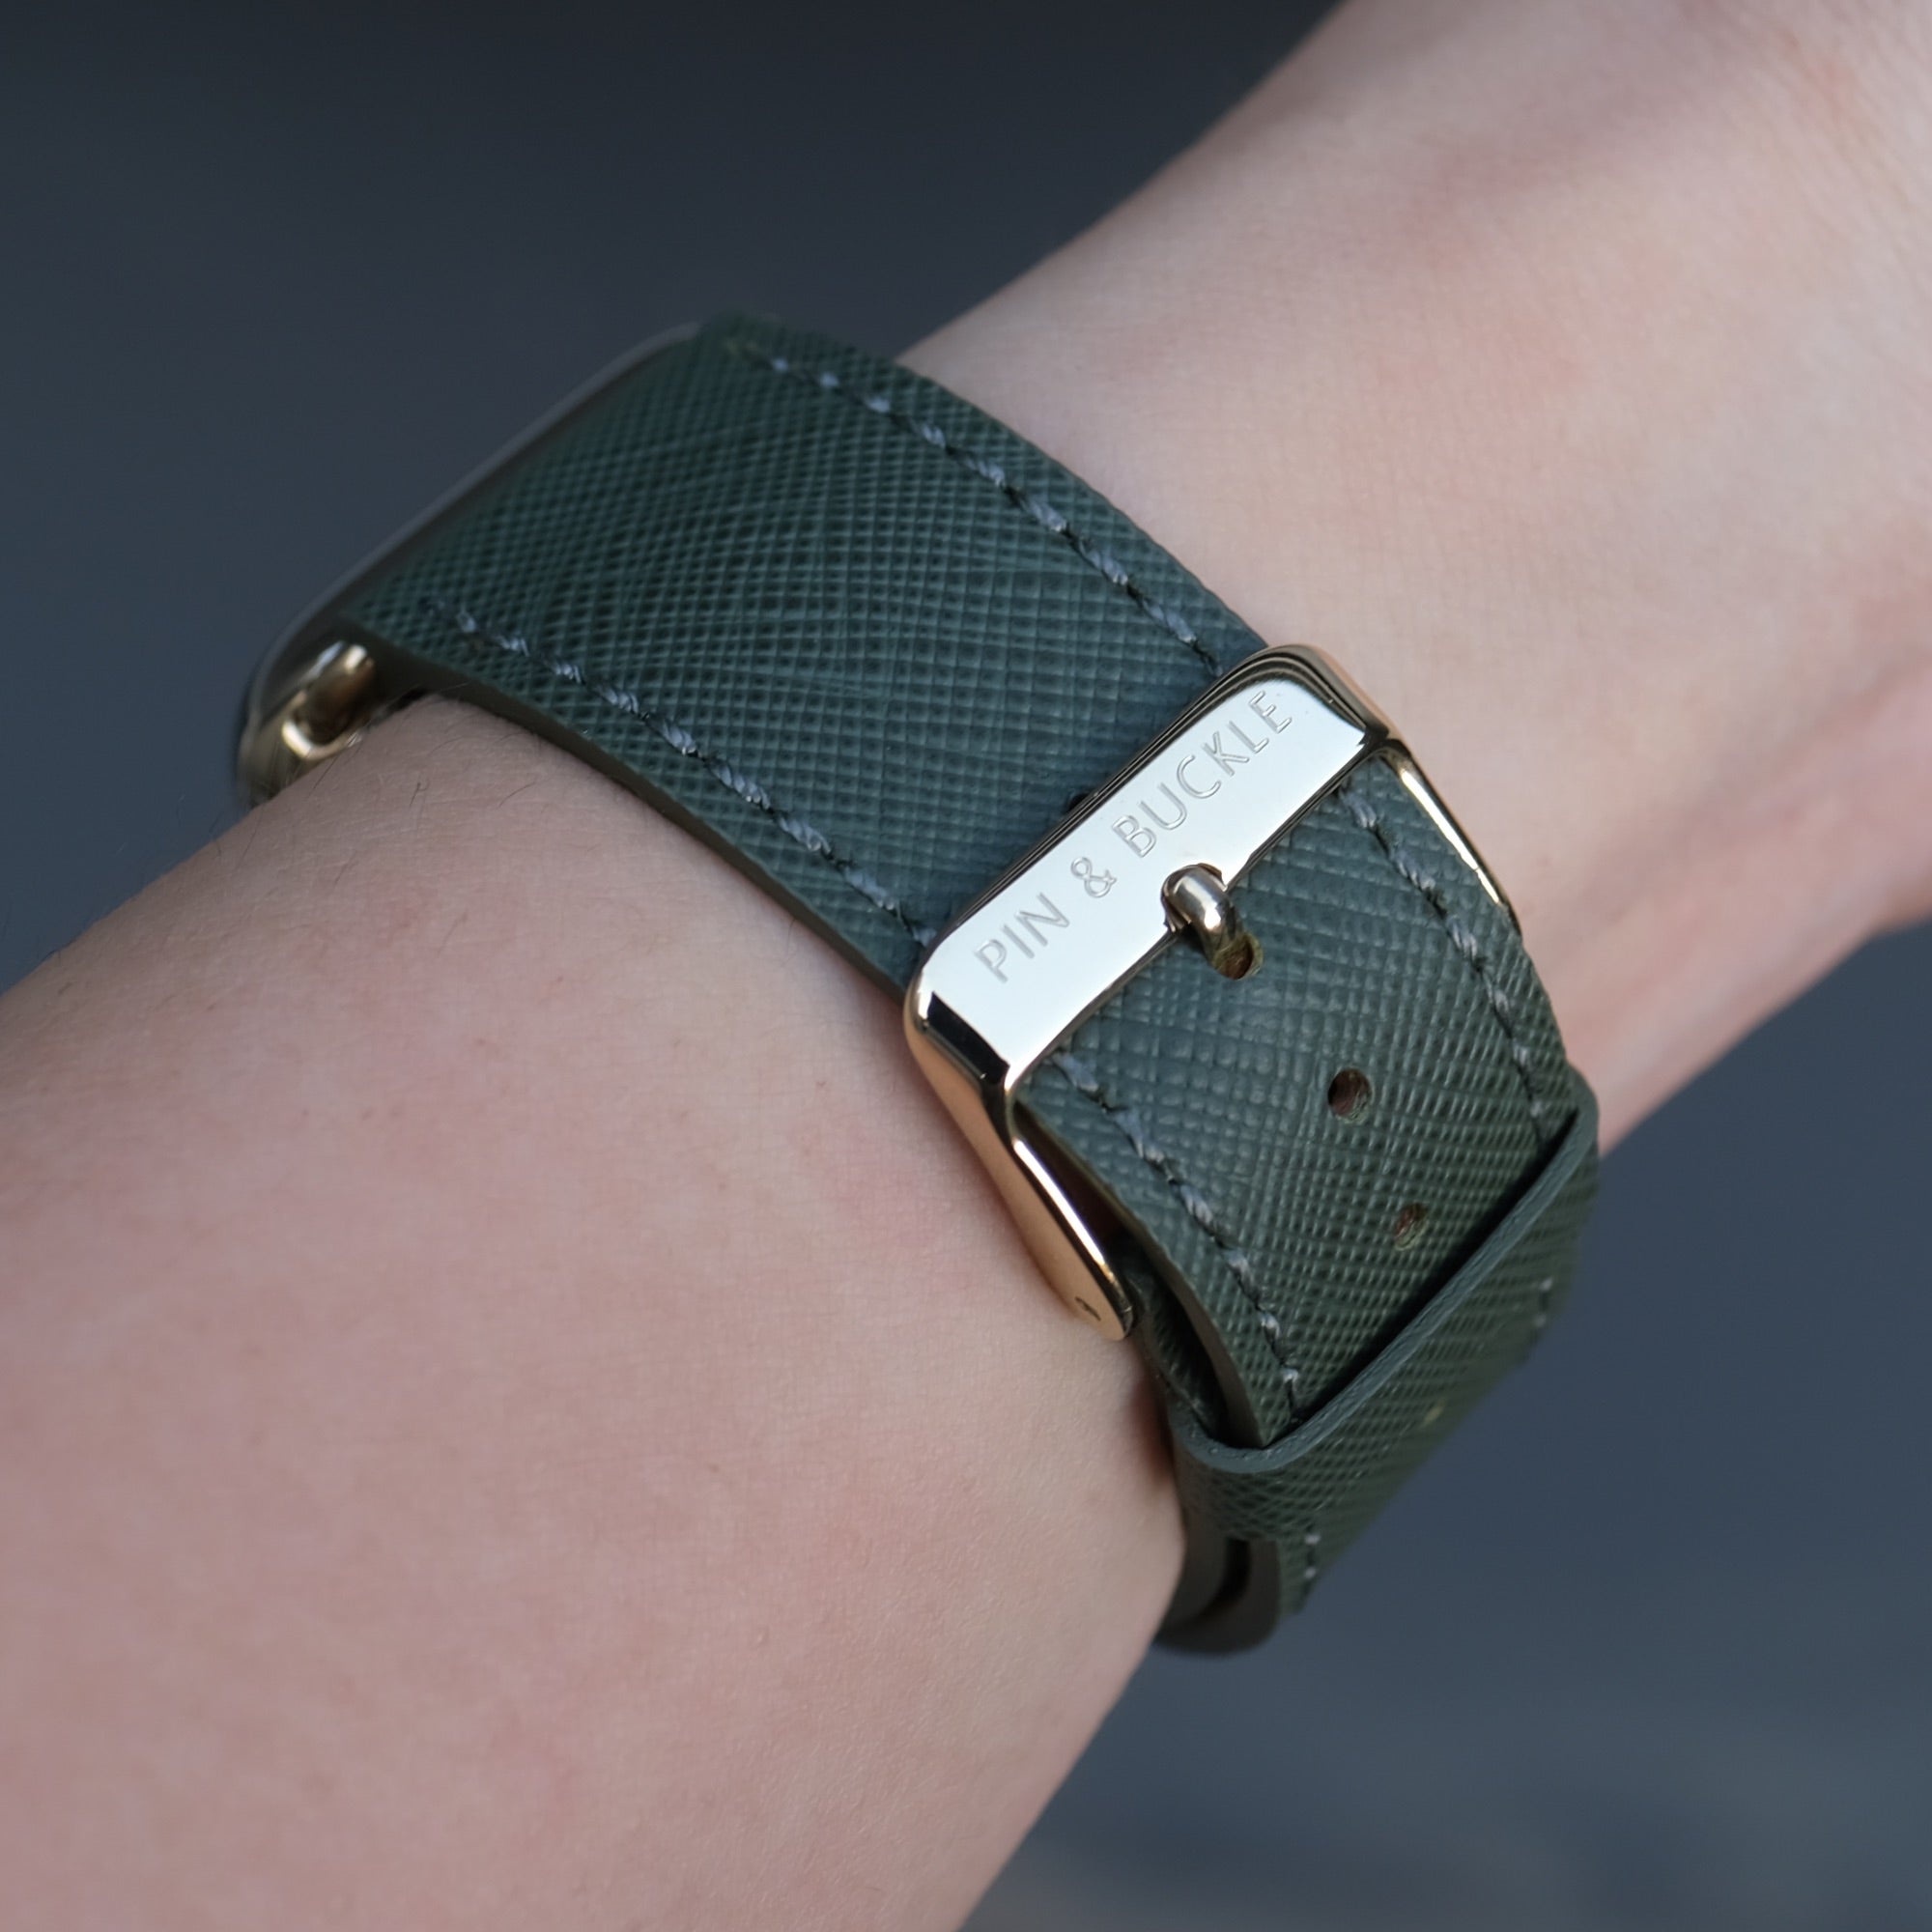 Pin and Buckle Apple Watch Bands - Saffiano - Textured Leather Apple Watch Bands - Oak Green on Gold Series 6 7 8 Stainless Steel - Buckle